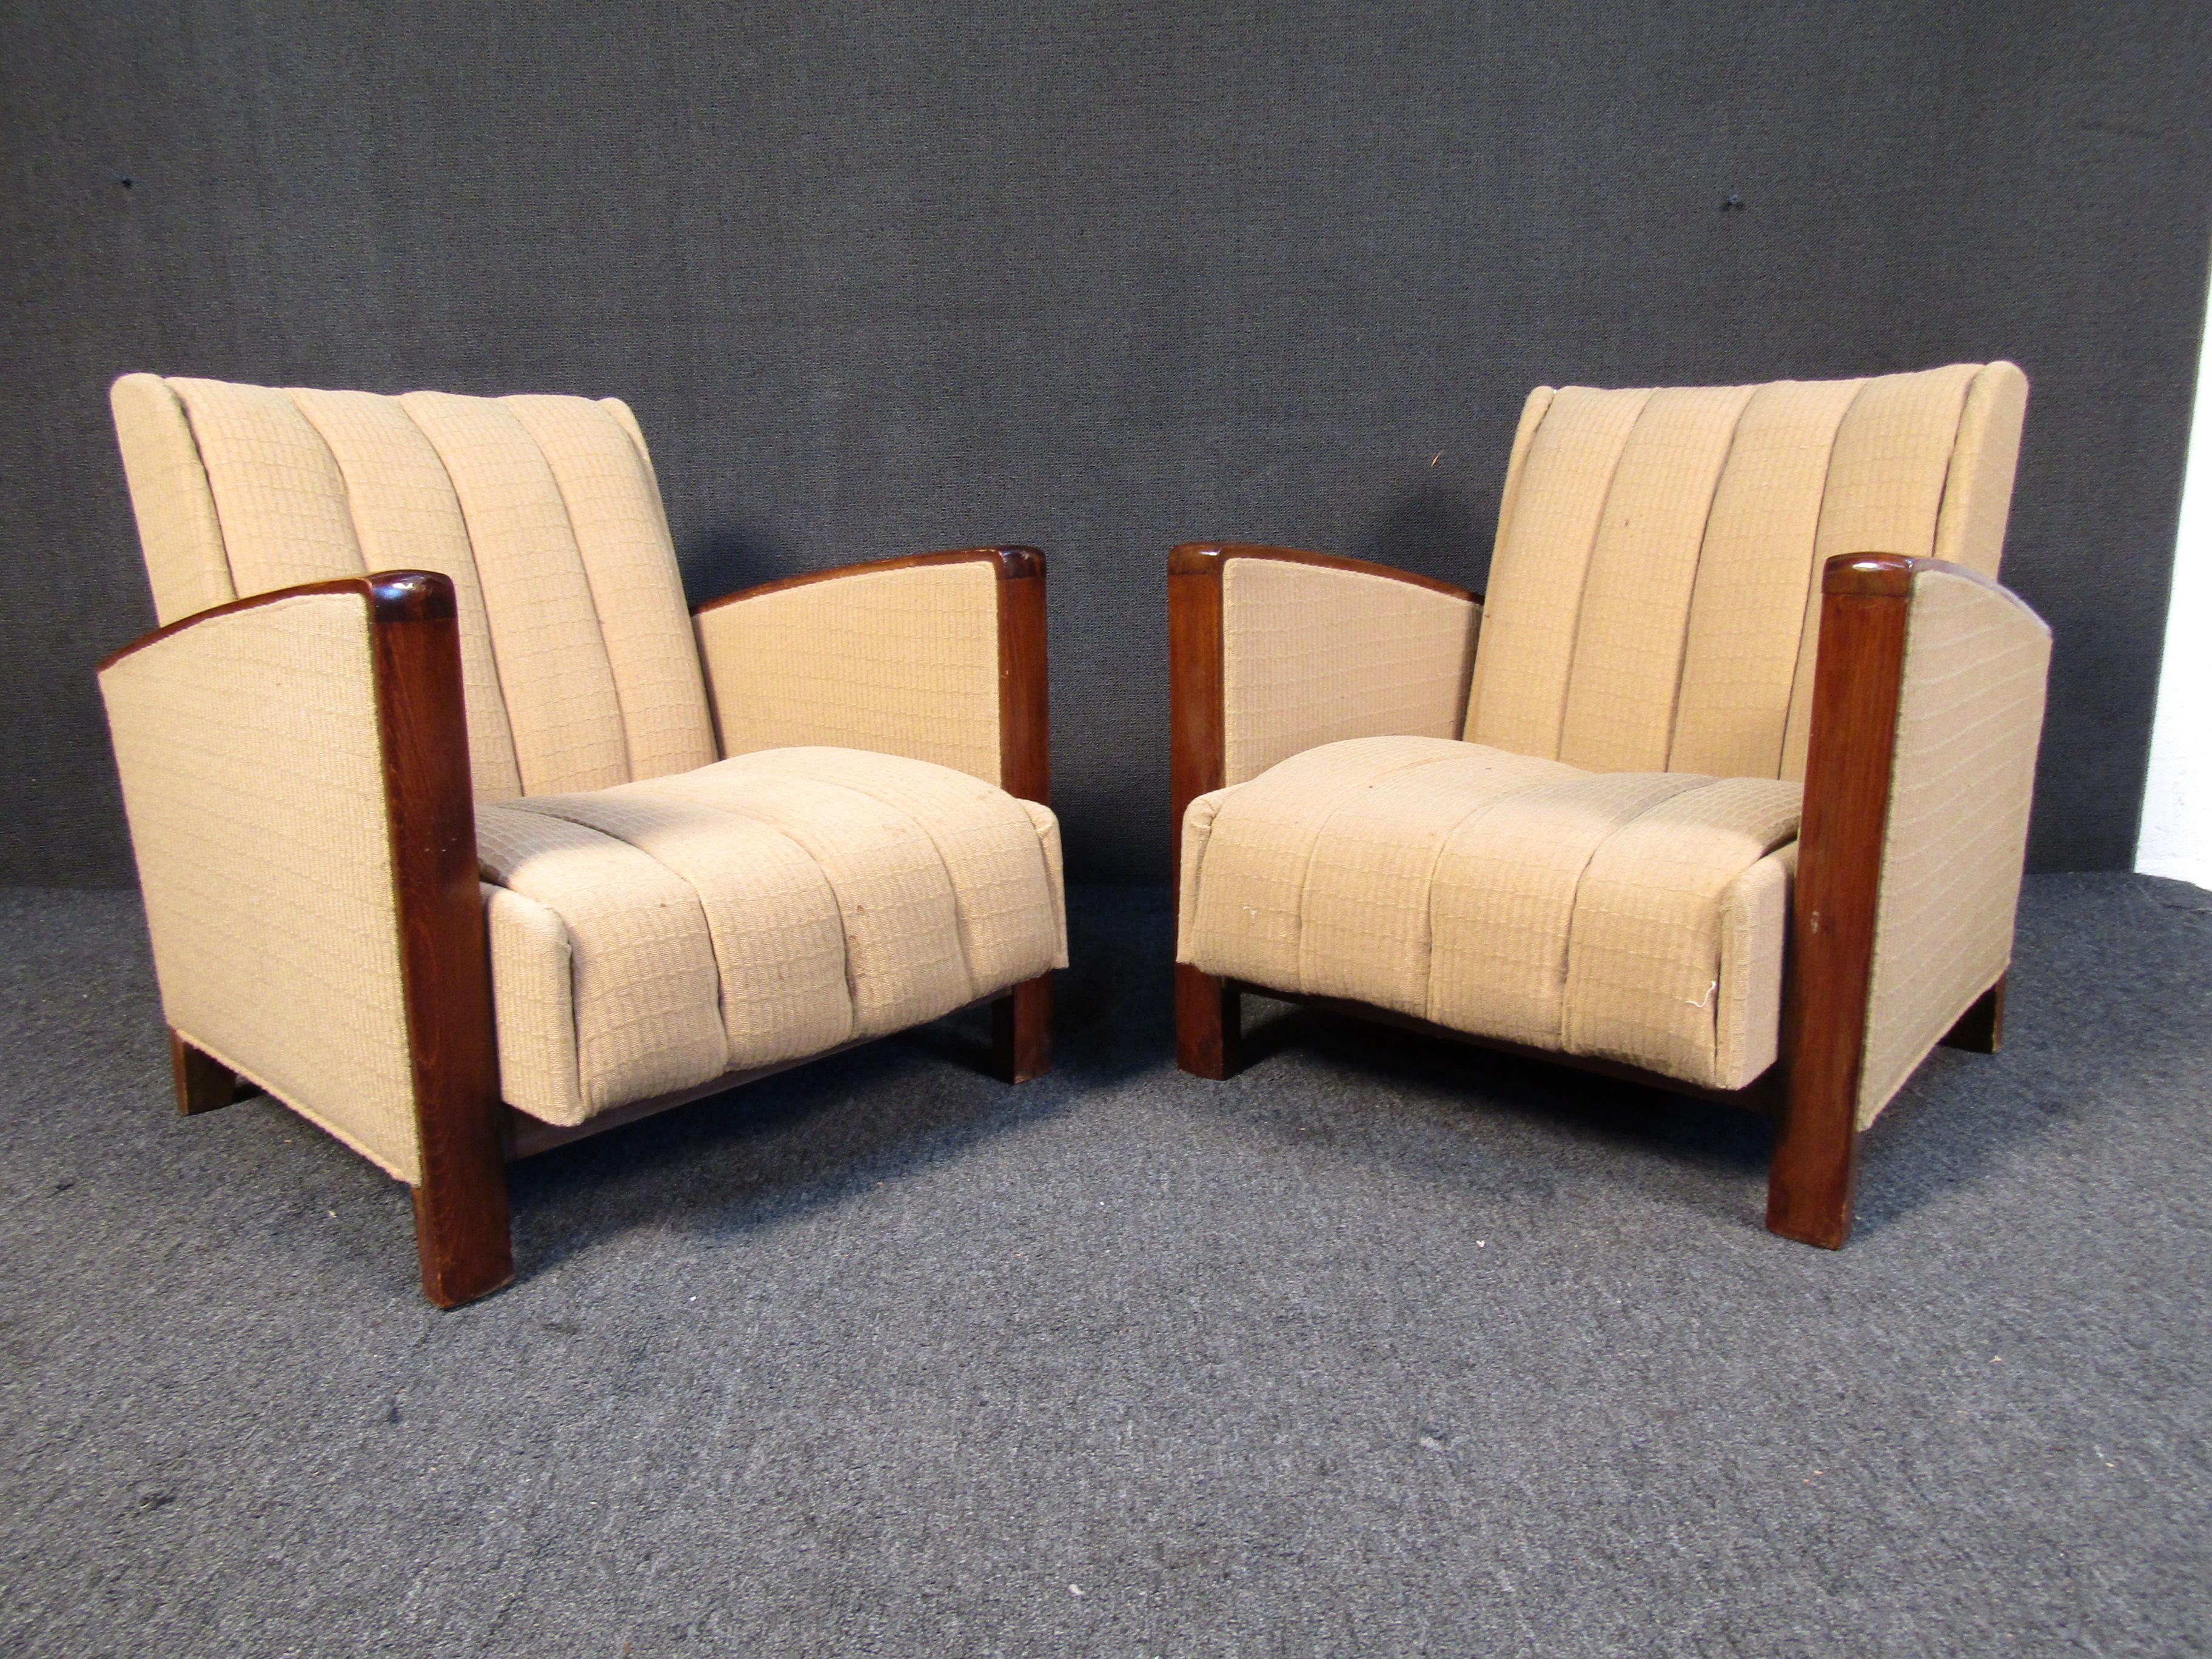 These line tufted mid century arm chairs feature a wooden base that slopes up forming comfortable armrests. The chairs do recline but only partially allowing the seat to move forward and back.
Please confirm item location (NY or NJ.).